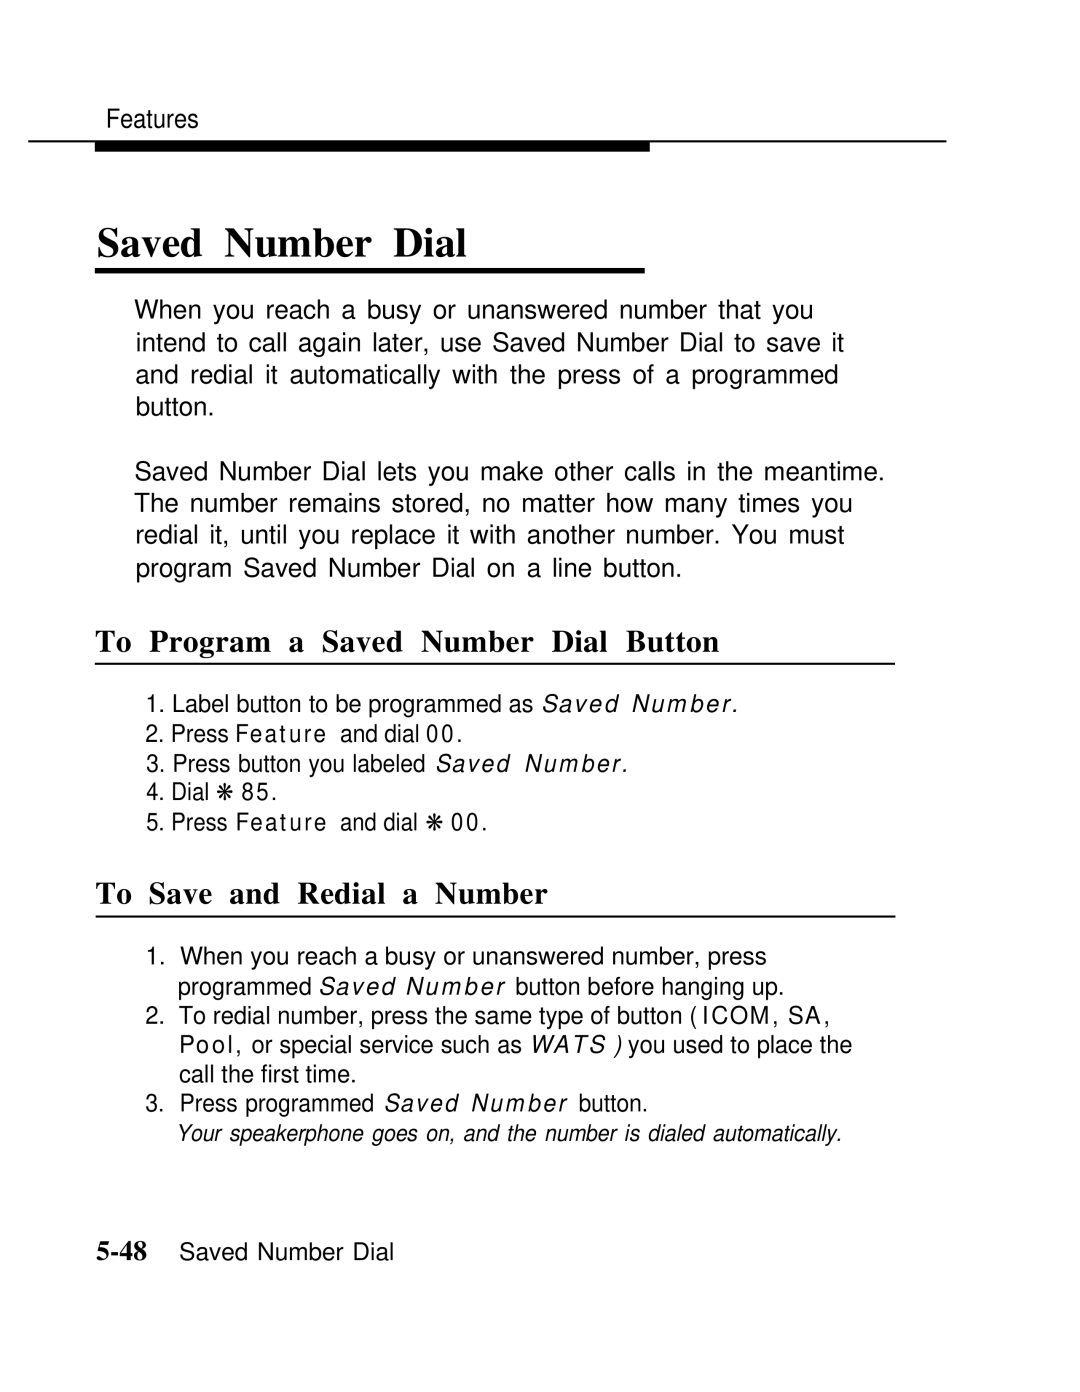 AT&T MLX-10 manual To Program a Saved Number Dial Button, To Save and Redial a Number 